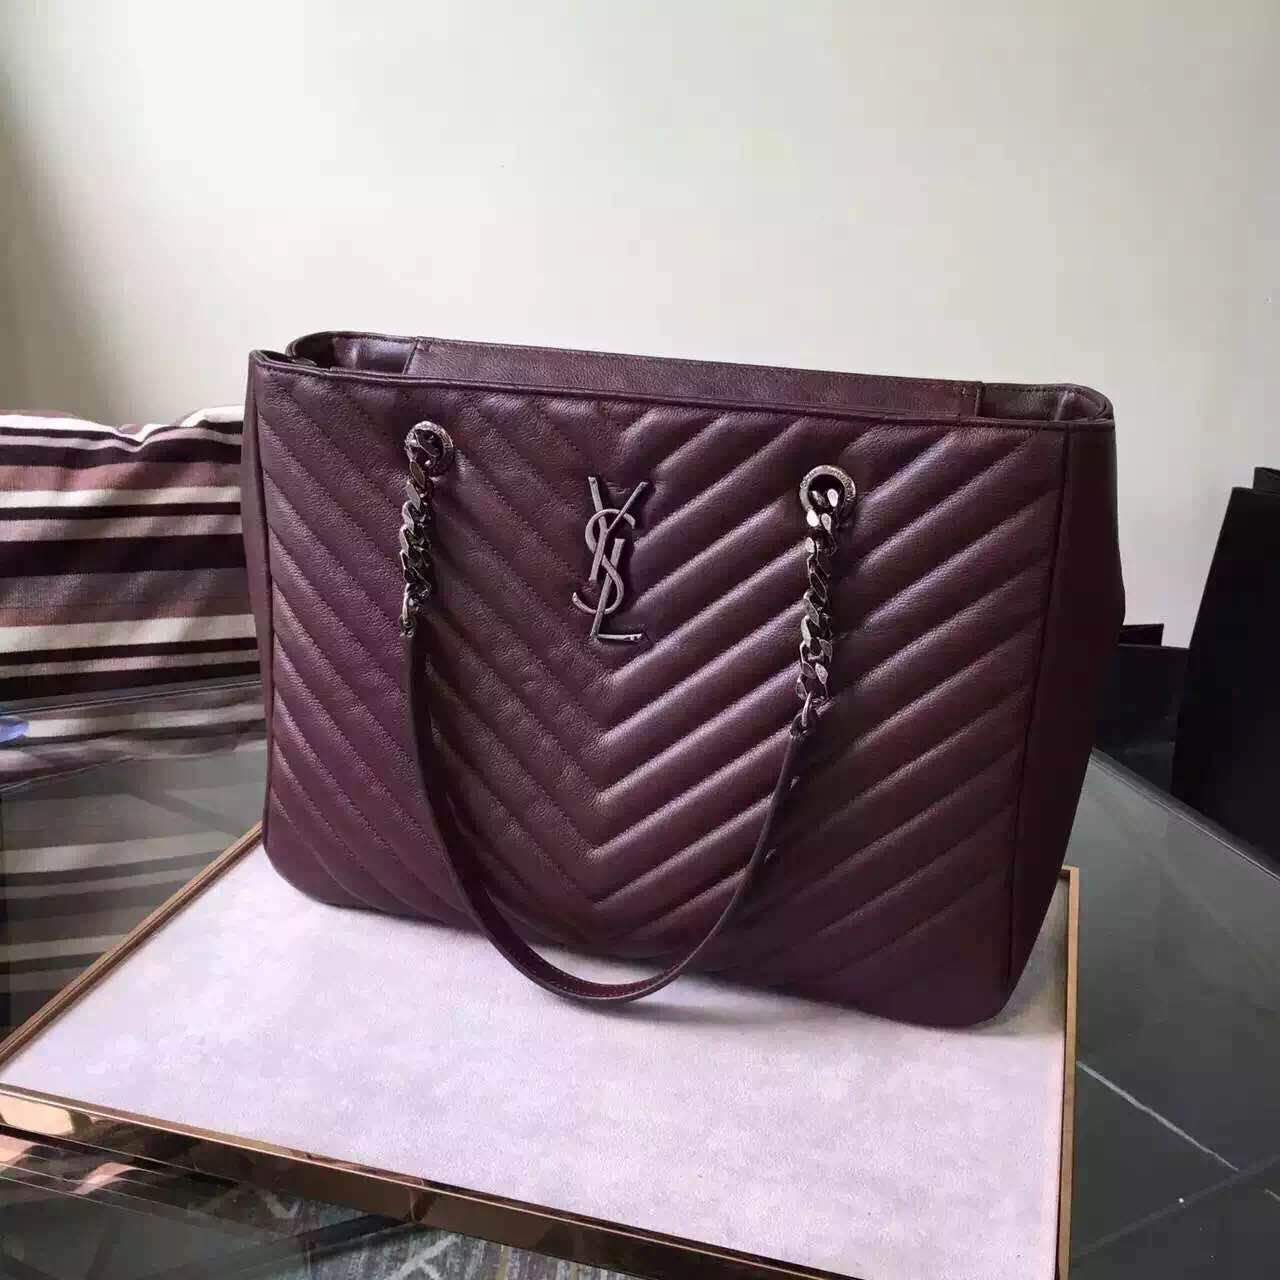 New Arrival!2016 Cheap YSL Out Sale with Free Shipping-Saint Laurent Classic Monogram Shopping Bag in Bordeaux MATELASSE Leather